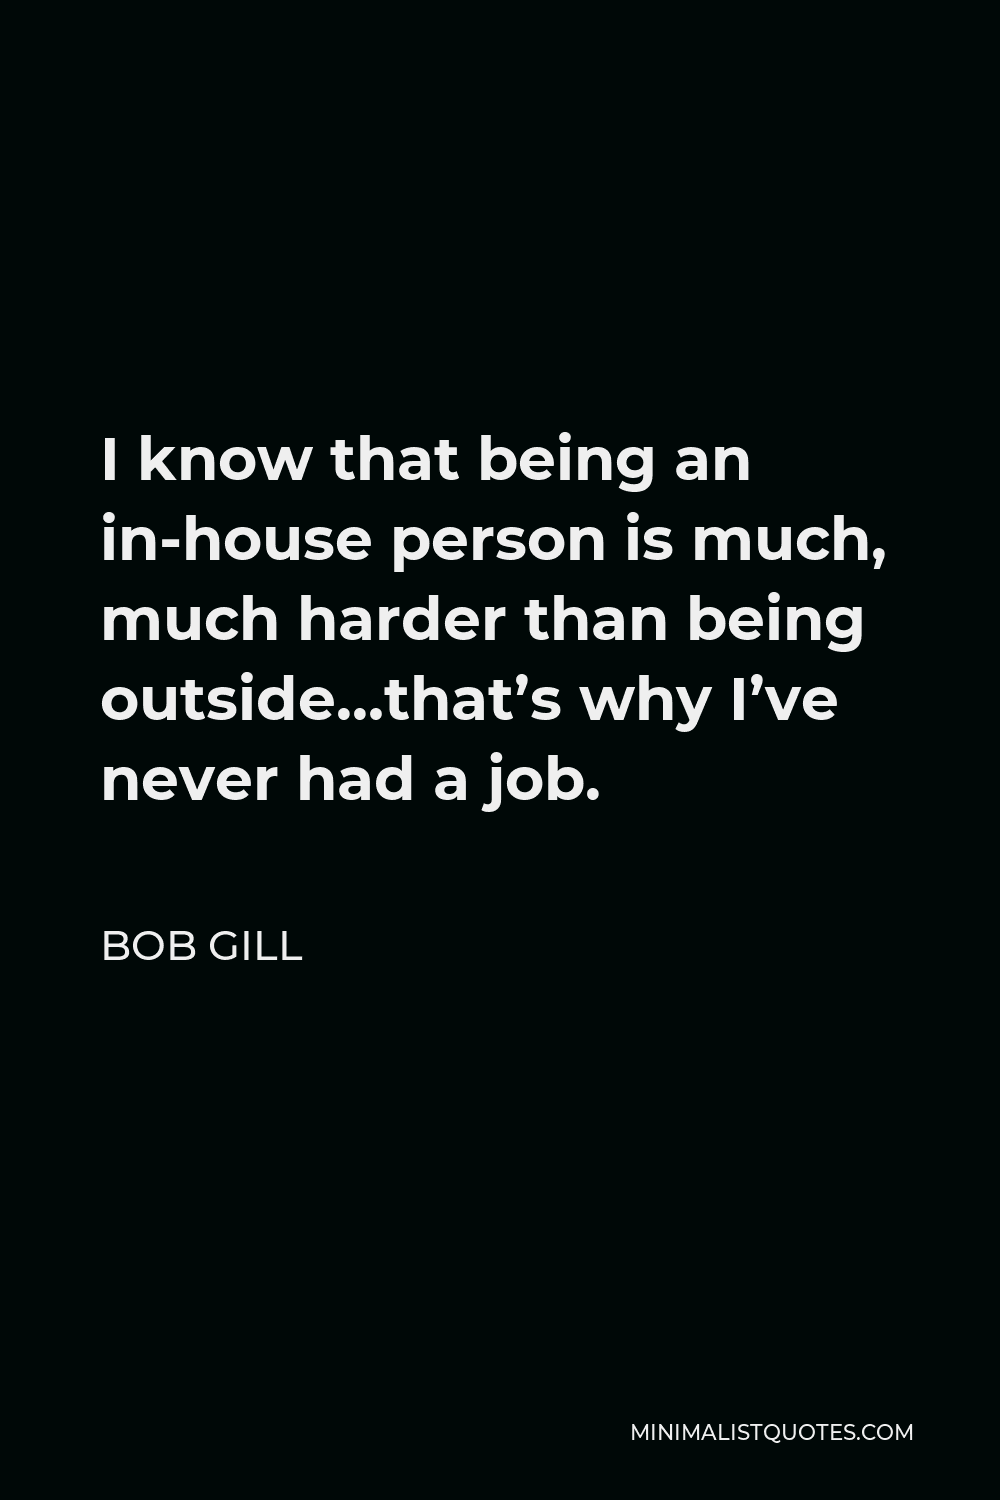 Bob Gill Quote - I know that being an in-house person is much, much harder than being outside…that’s why I’ve never had a job.